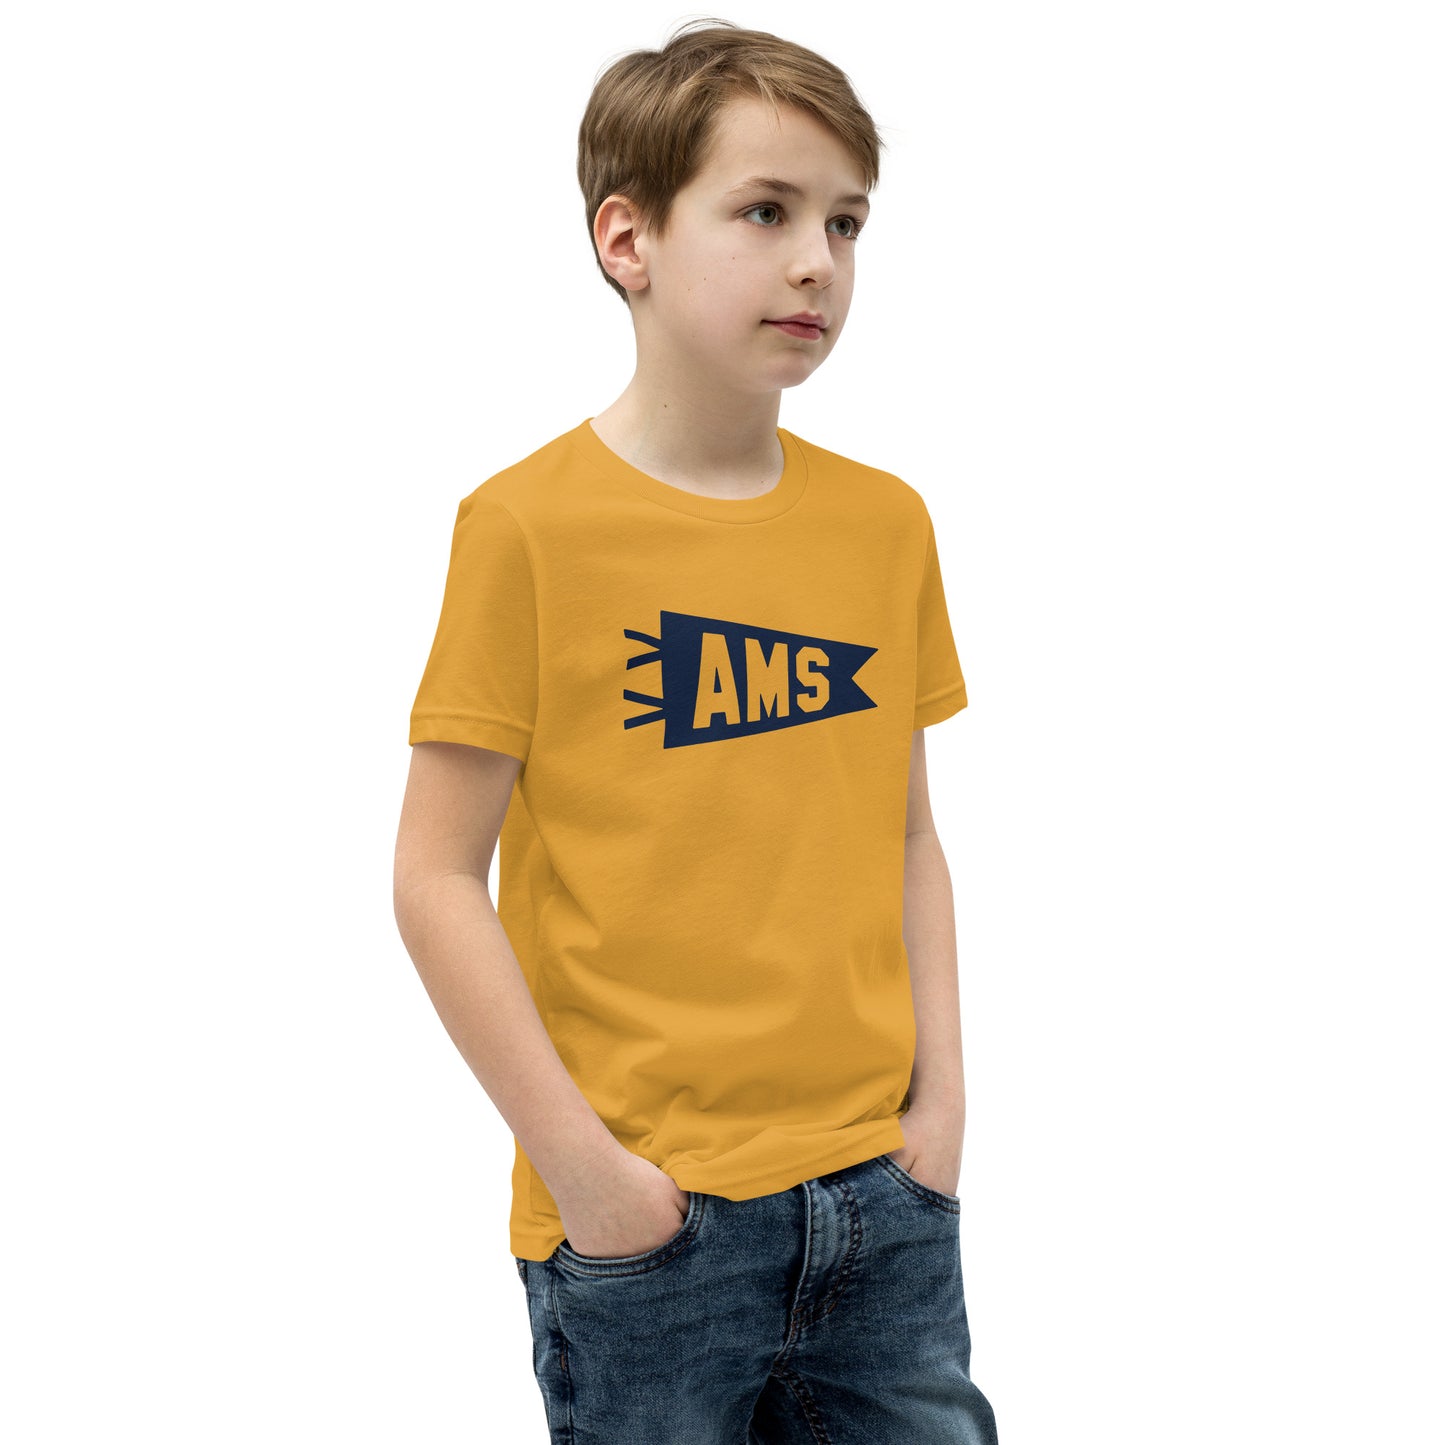 Kid's Airport Code Tee - Navy Blue Graphic • AMS Amsterdam • YHM Designs - Image 07